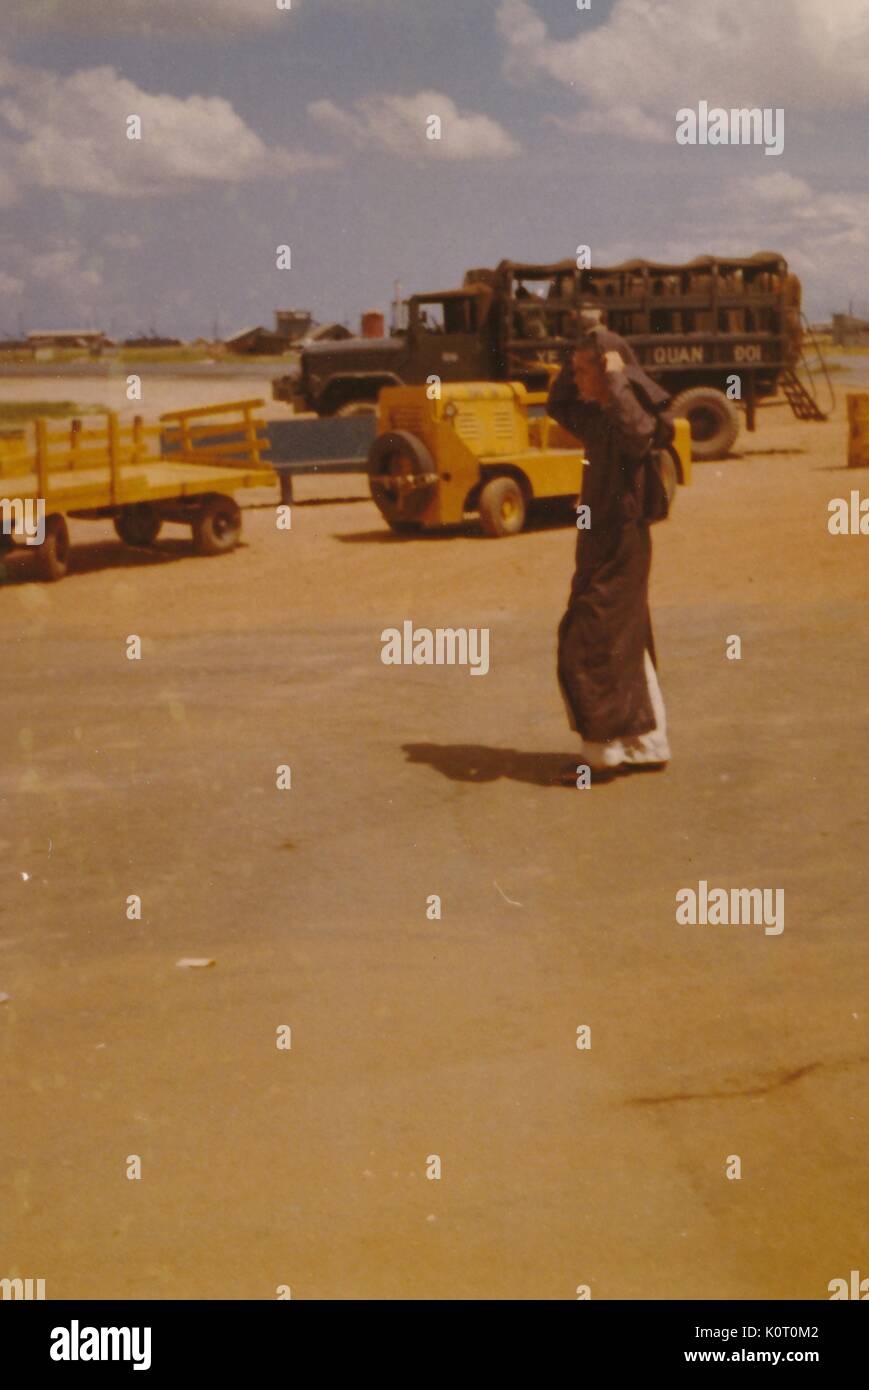 Vietnamese man walking on an airfield, airport and military equipment seen in the background, Phu Bai Combat Base, Vietnam, 1964. Stock Photo